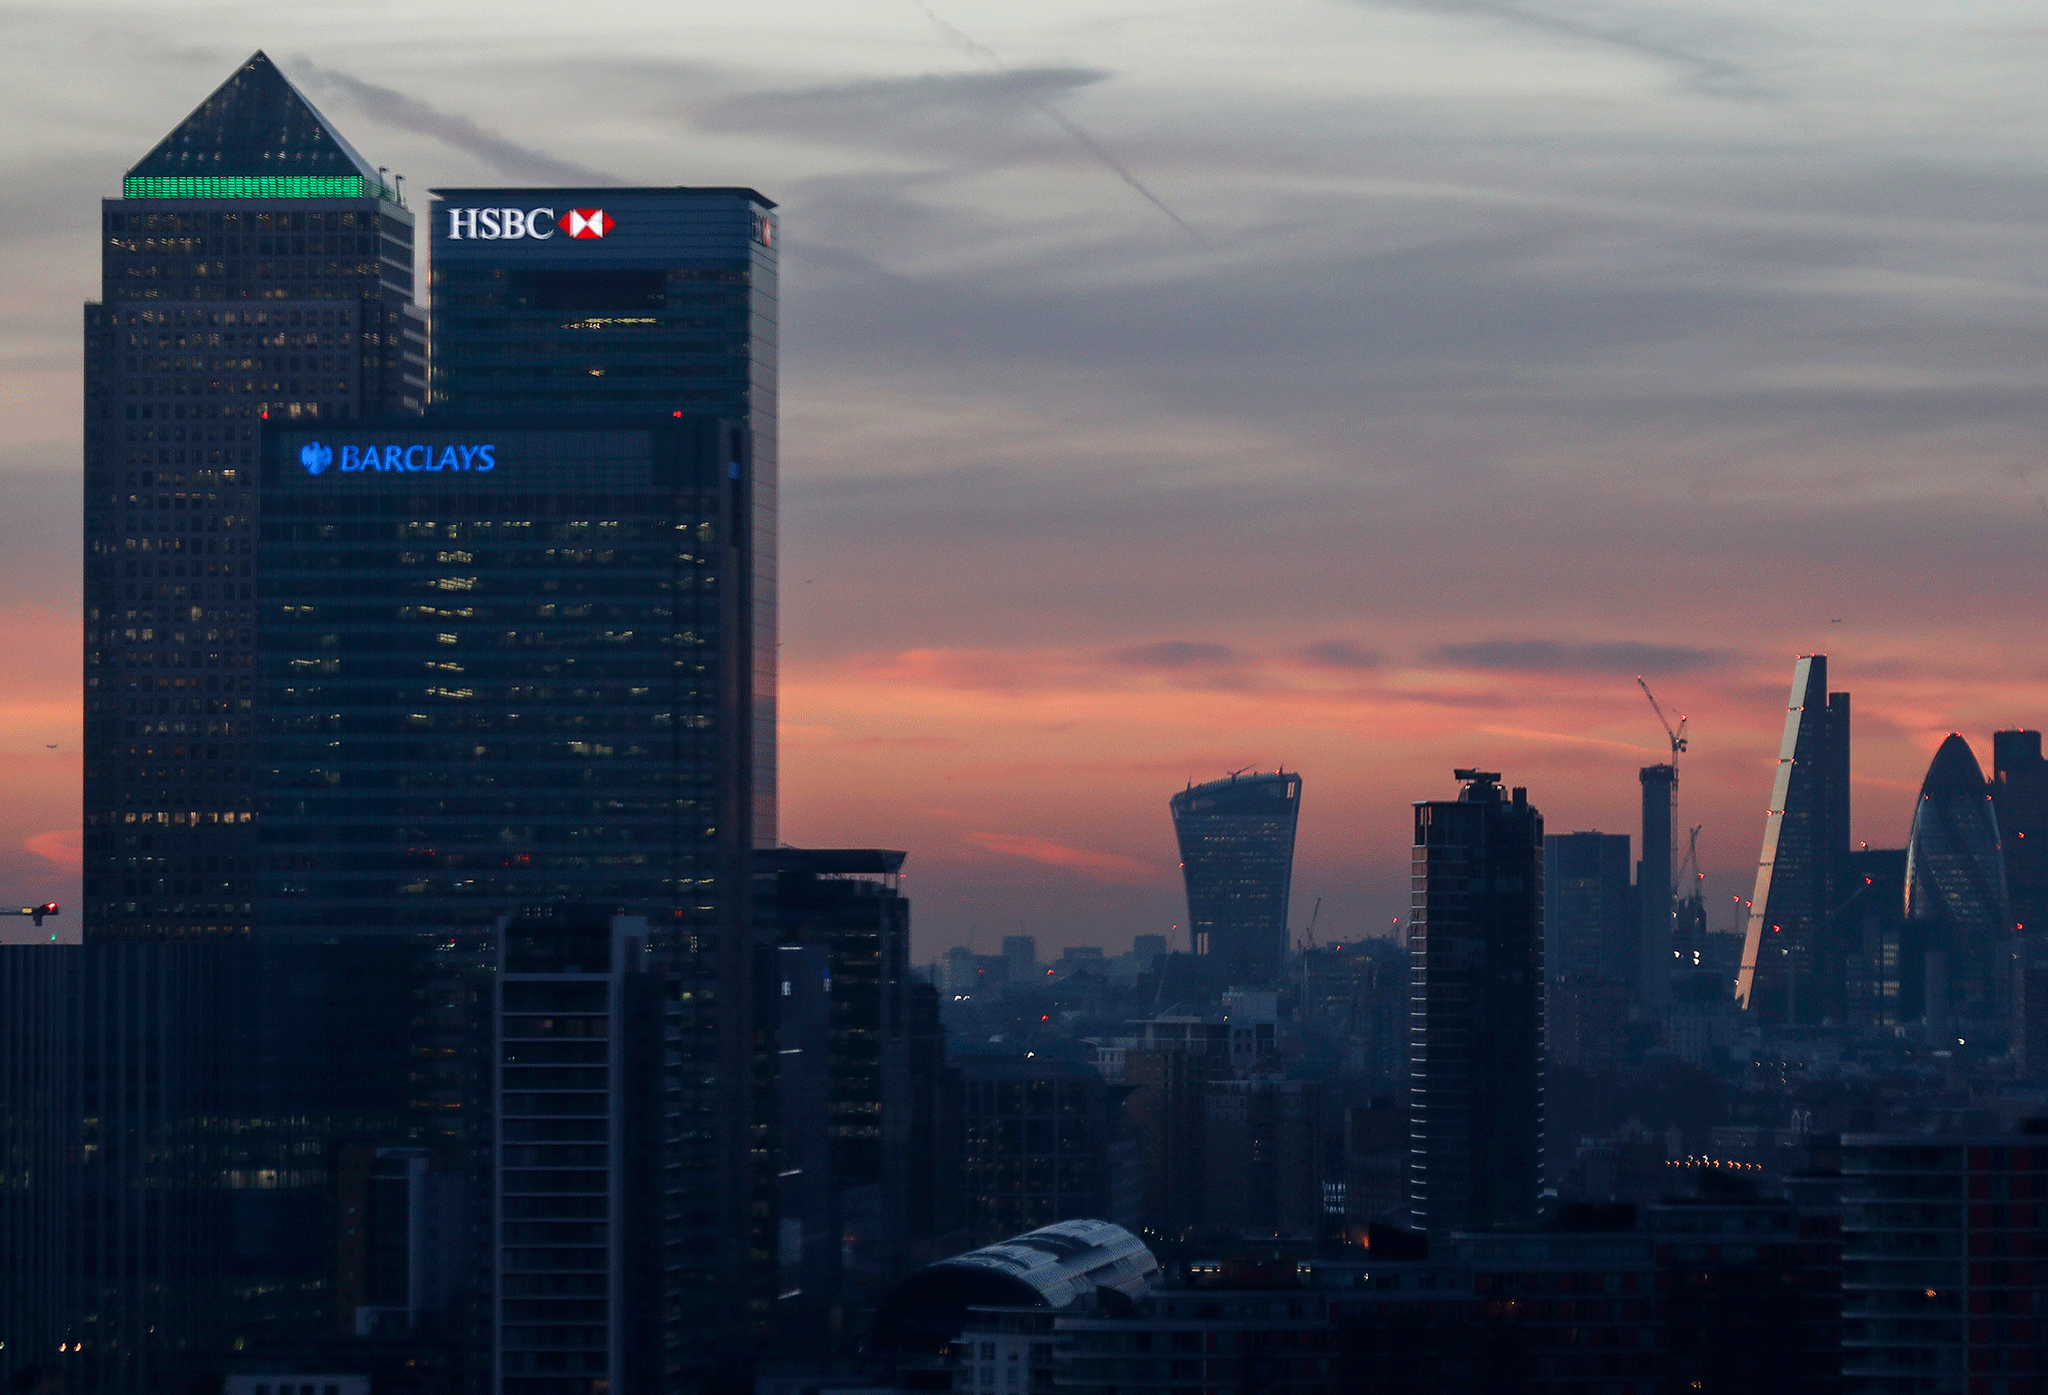 Financial services are set to flee Britain